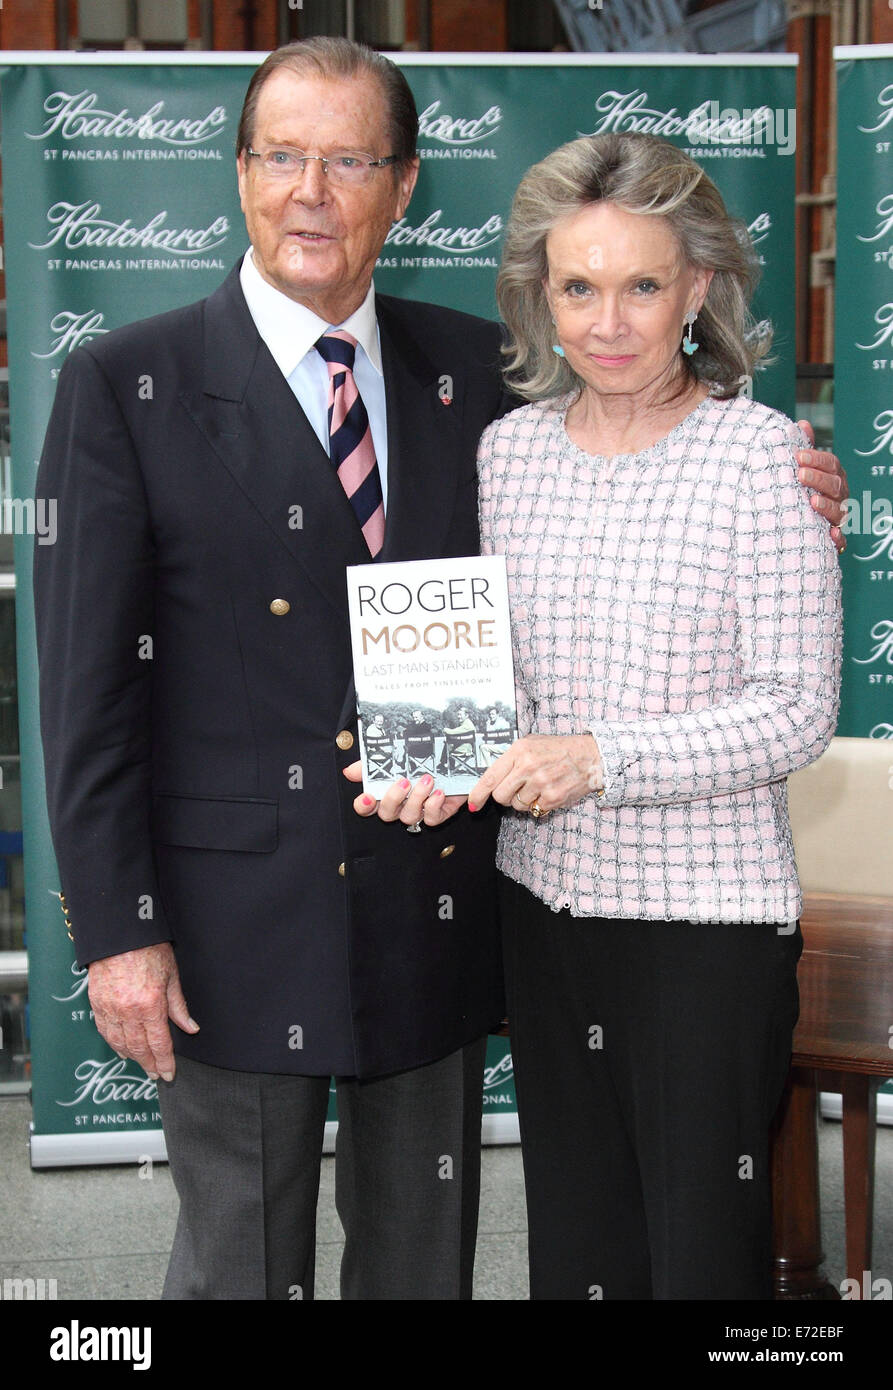 London, UK. 4th September, 2014. Sir Roger Moore - pictured with wife, Kristina Tholstrup - signs copies of his autobiography 'Last Man Standing: Tales From Tinseltown', at Hatchards St Pancras Station, on September 04 2014 in London, England   Credit:  KEITH MAYHEW/Alamy Live News Stock Photo